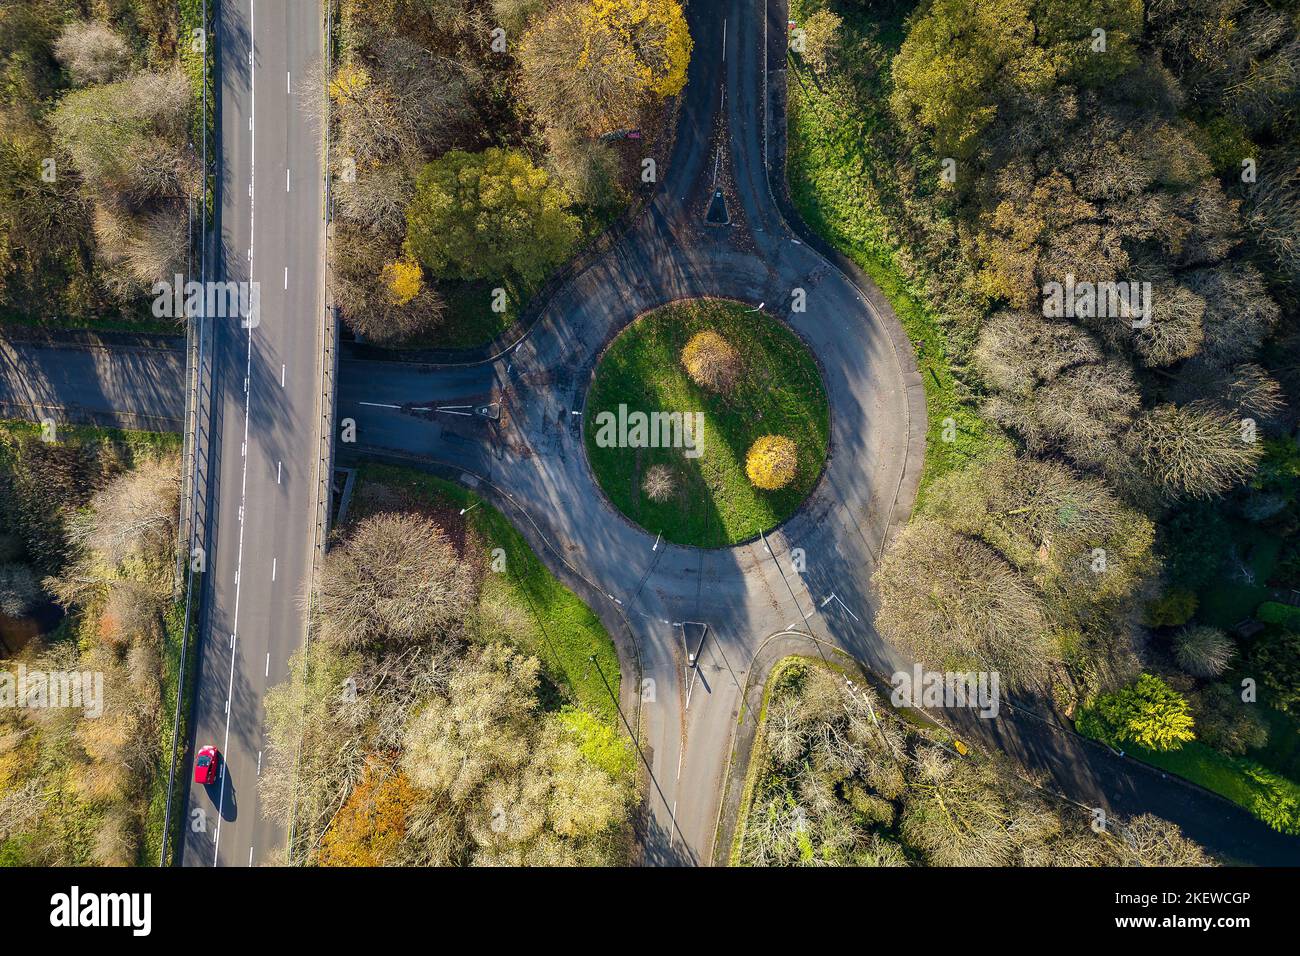 Traffic roundabout on a small road surrounded by trees displaying colorful fall leaves (Wales, UK) Stock Photo